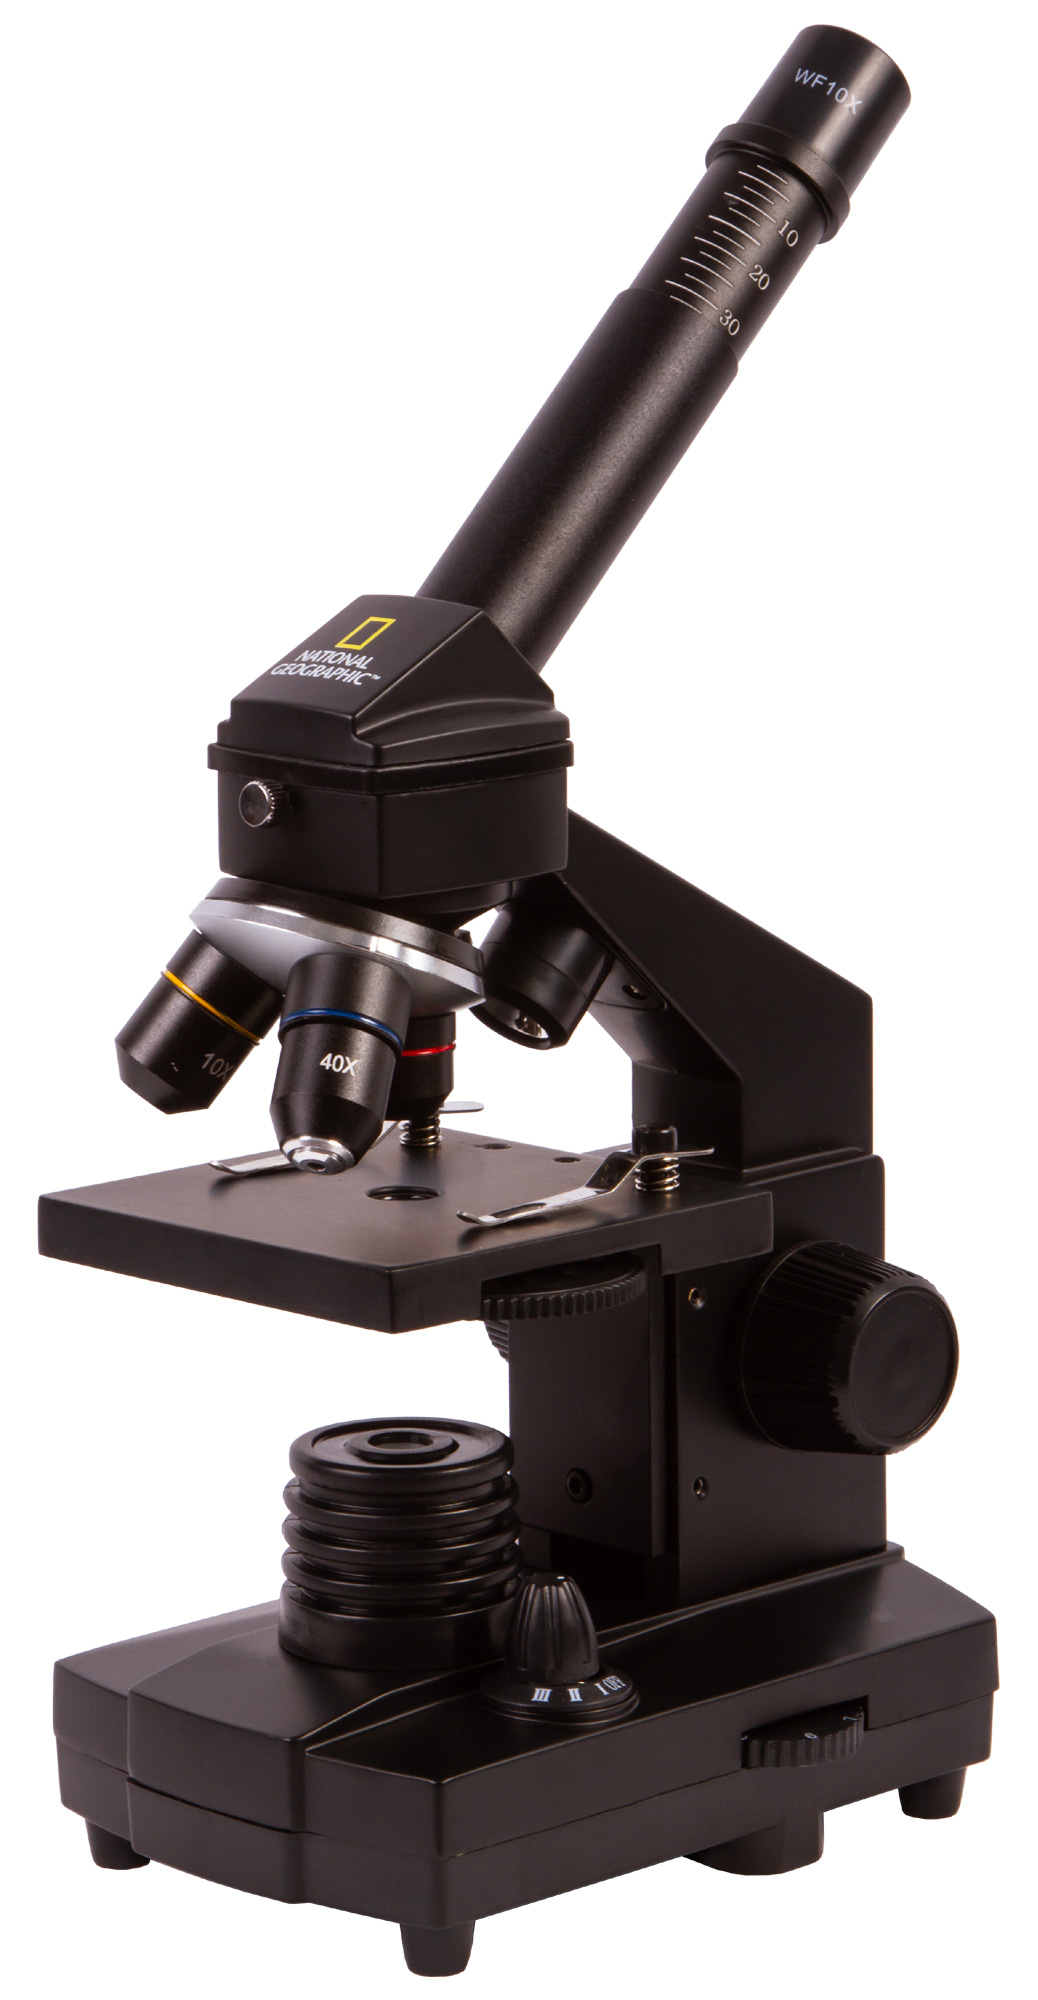 Bresser%20National%20Geographic%2040x–1280x%20Microscope%20with%20Smartphone%20Holder